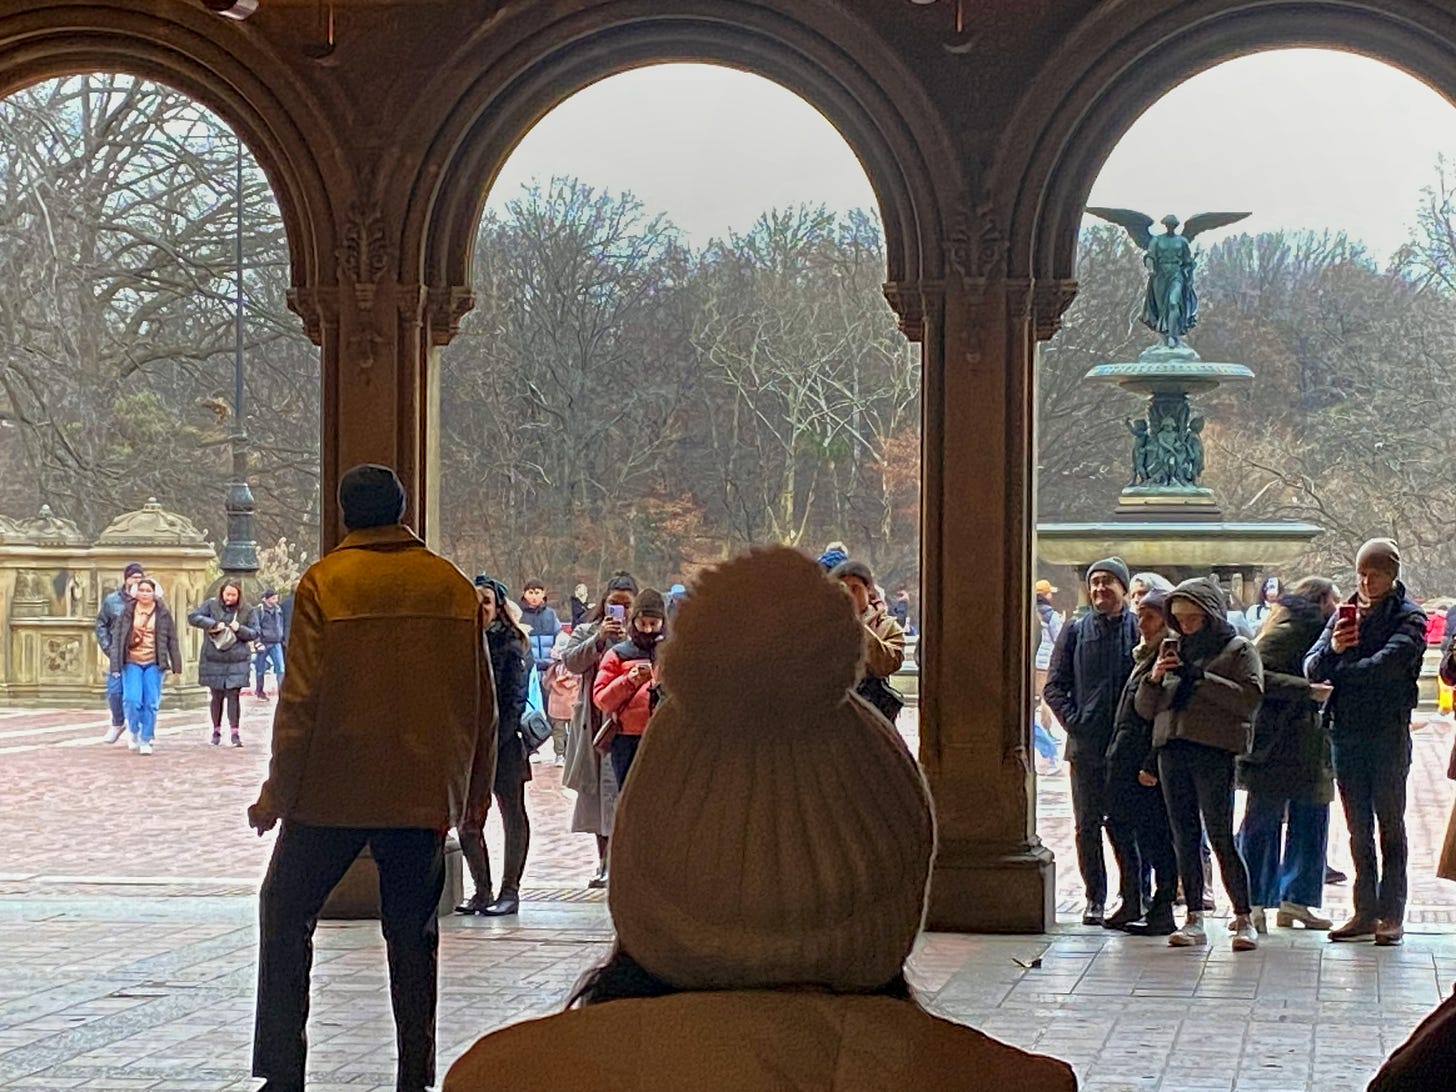 A man in a light-colored jacket sings jazz standards under the Bethesda Terrace. A crowd of bundled up New Yorkers stands watching and filming on their phones. The Angel of the Waters is visible through the right terrace arch.